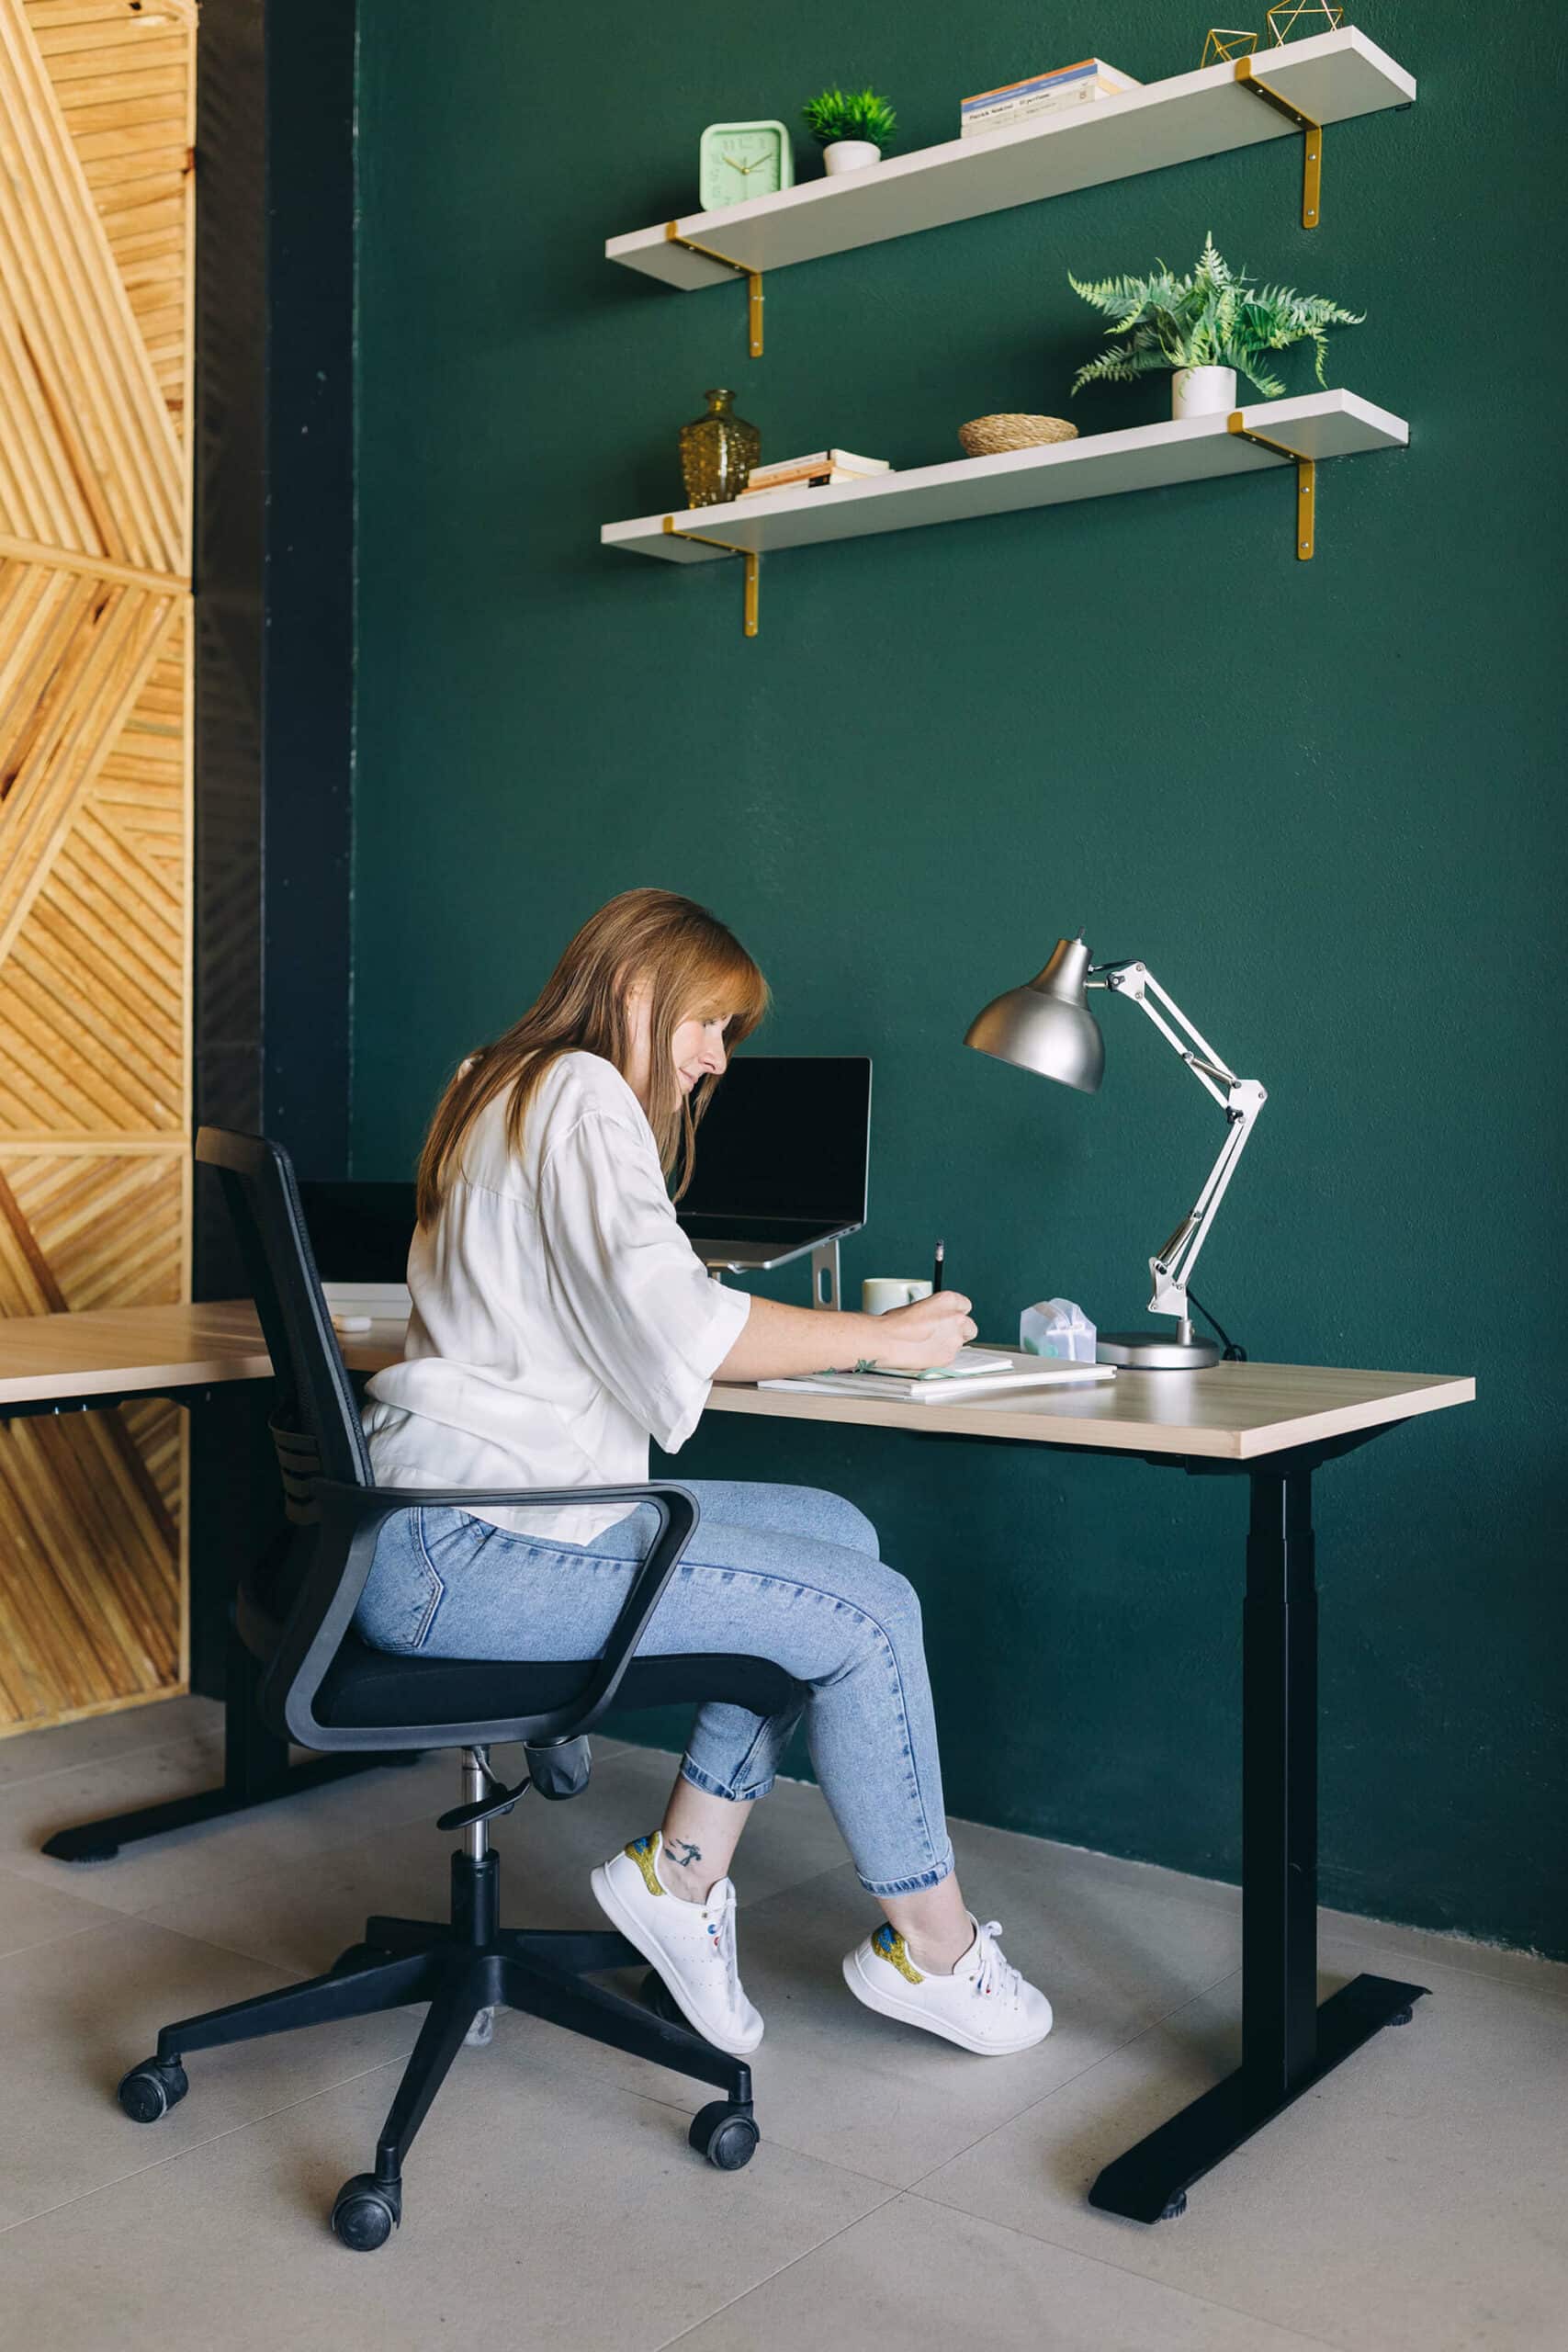 A woman sits at a desk in a modern home office, working on a laptop. The room features a dark green wall, floating shelves with plants and decorative items, and a wooden herringbone pattern on an adjacent wall. The woman is wearing a white shirt, blue jeans, and white sneakers, focusing on her notebook with a desk lamp beside her.